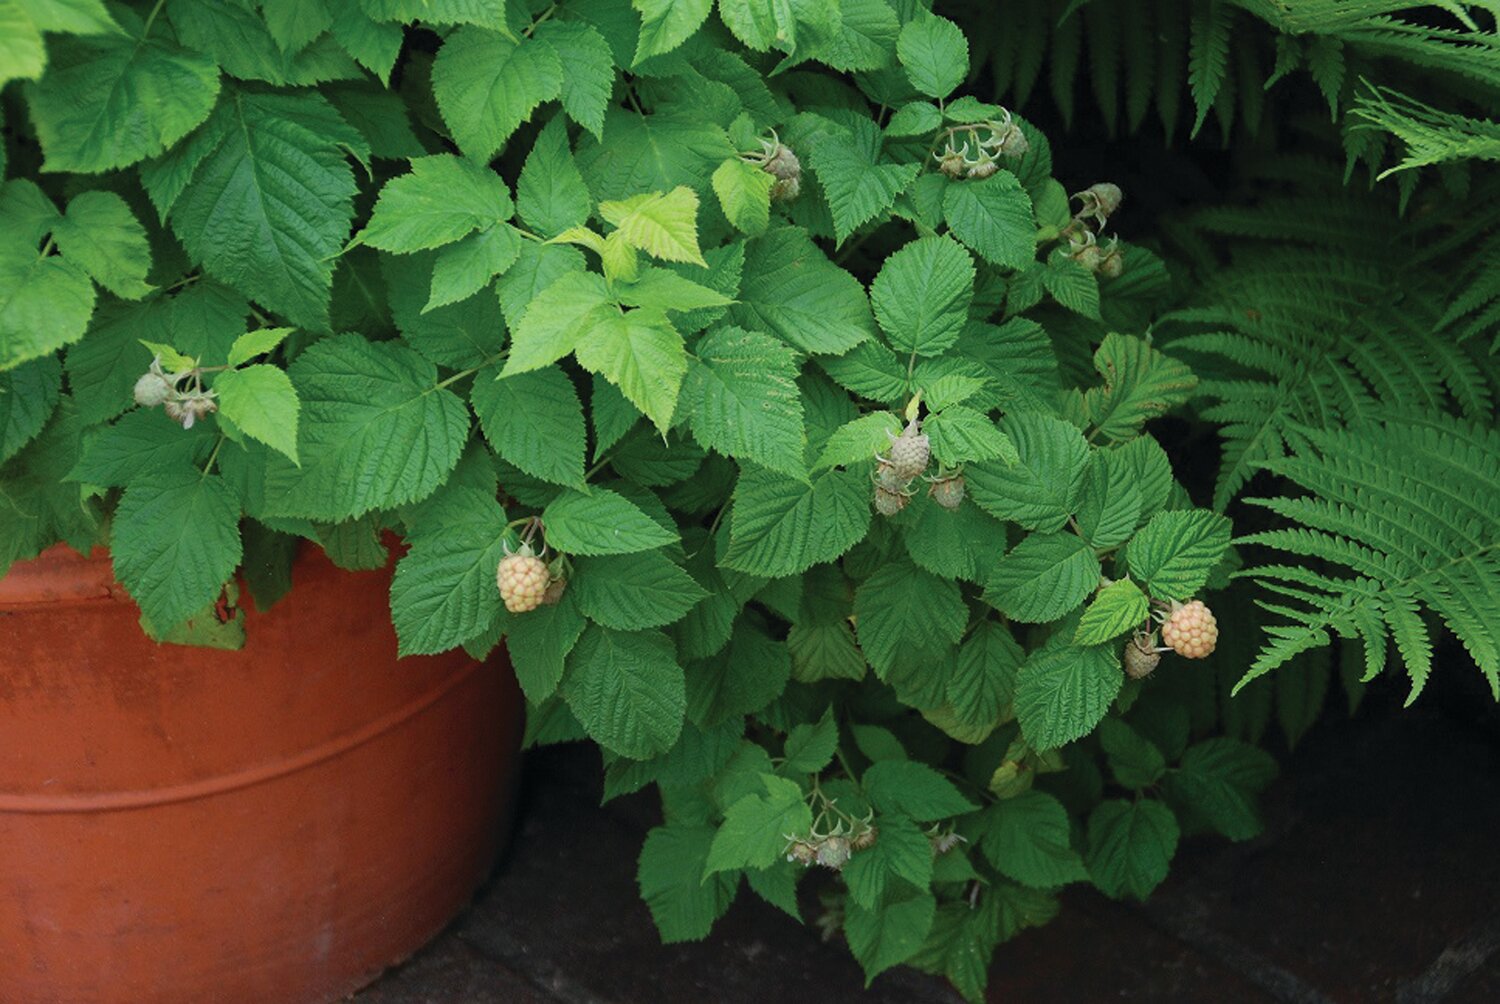 Compact varieties of raspberries and other fruit are well suited to being grown in containers and small spaces.